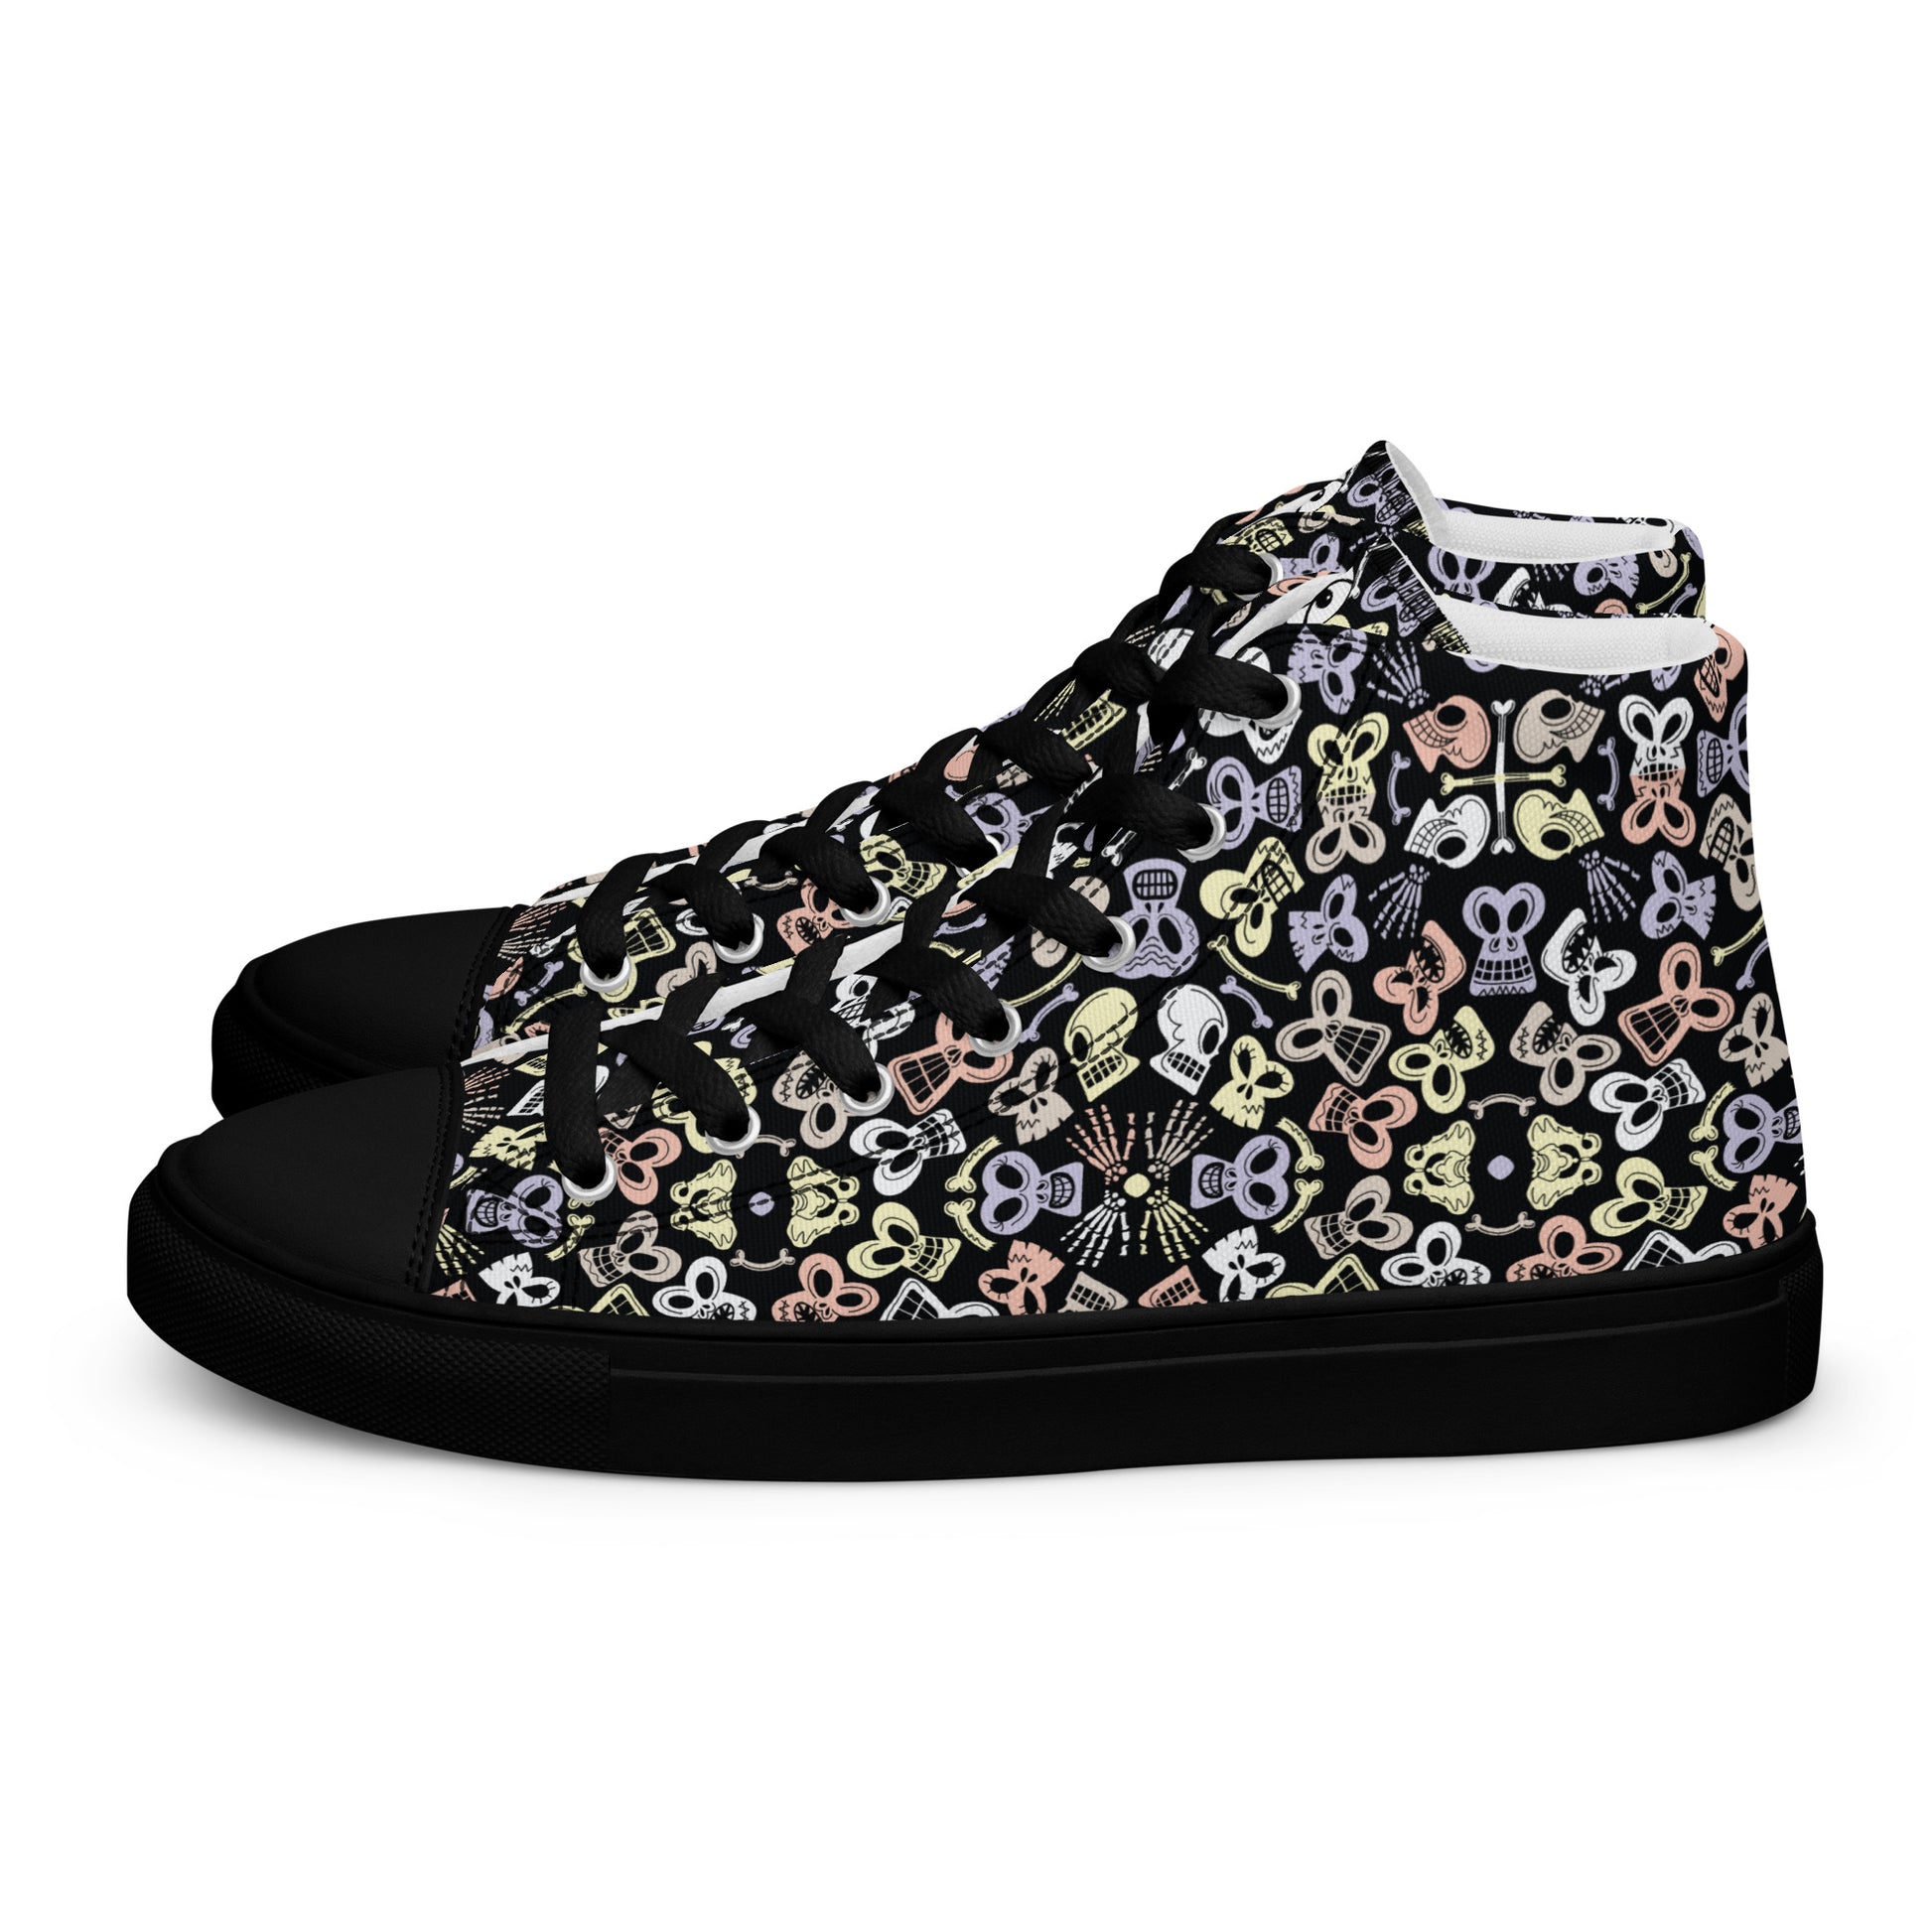 Bewitched Skulls: Hauntingly Chic Pattern Design - Men’s high top canvas shoes. Black color. Side view